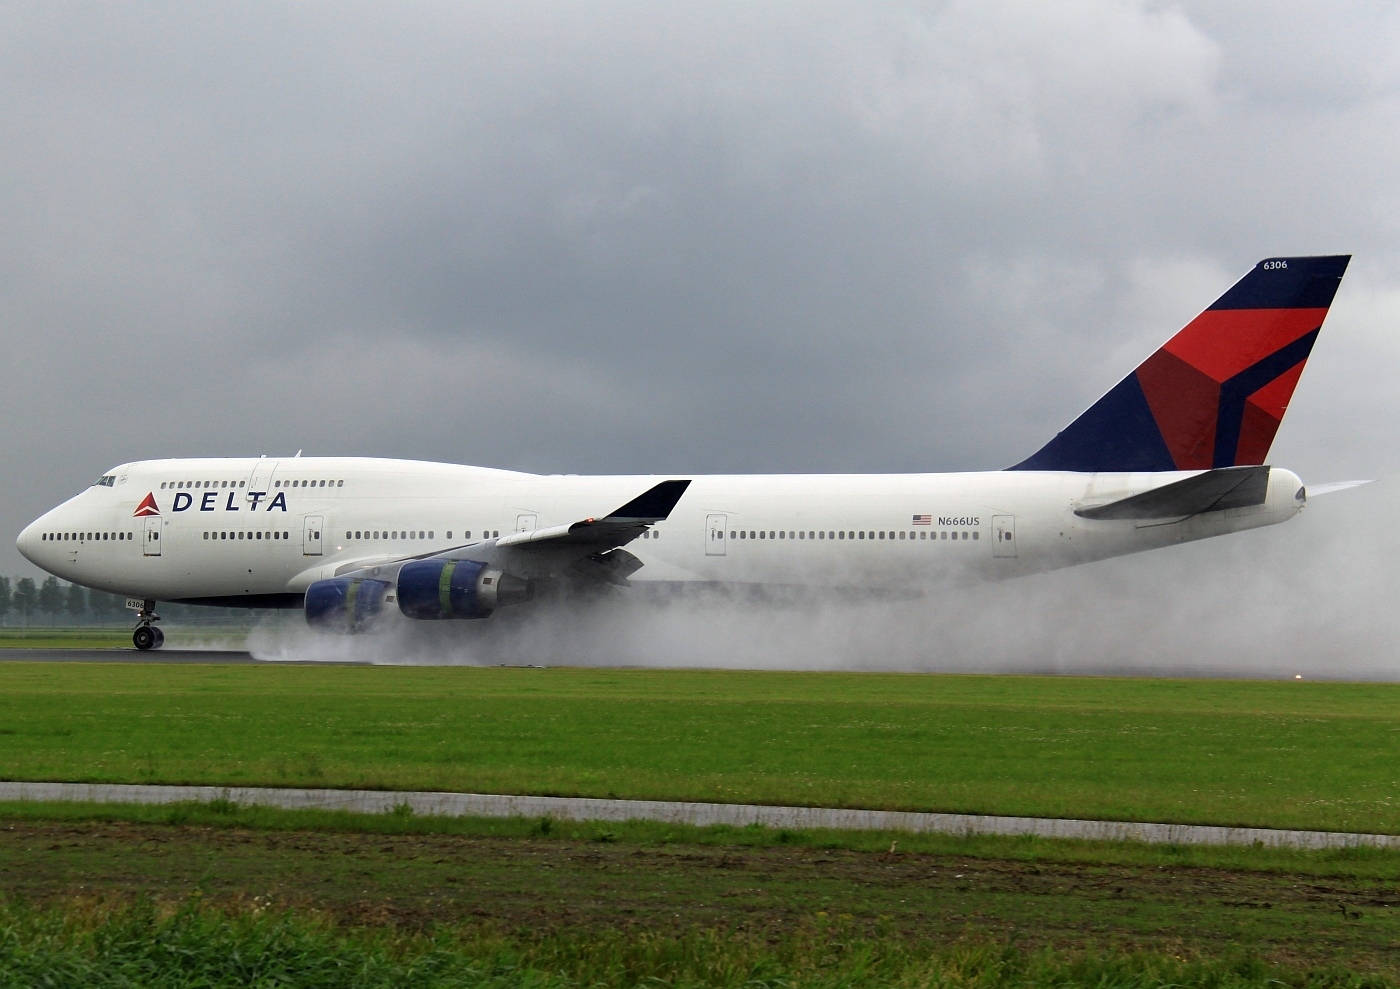 Delta Airlines Airplane Smoke On Grass Field